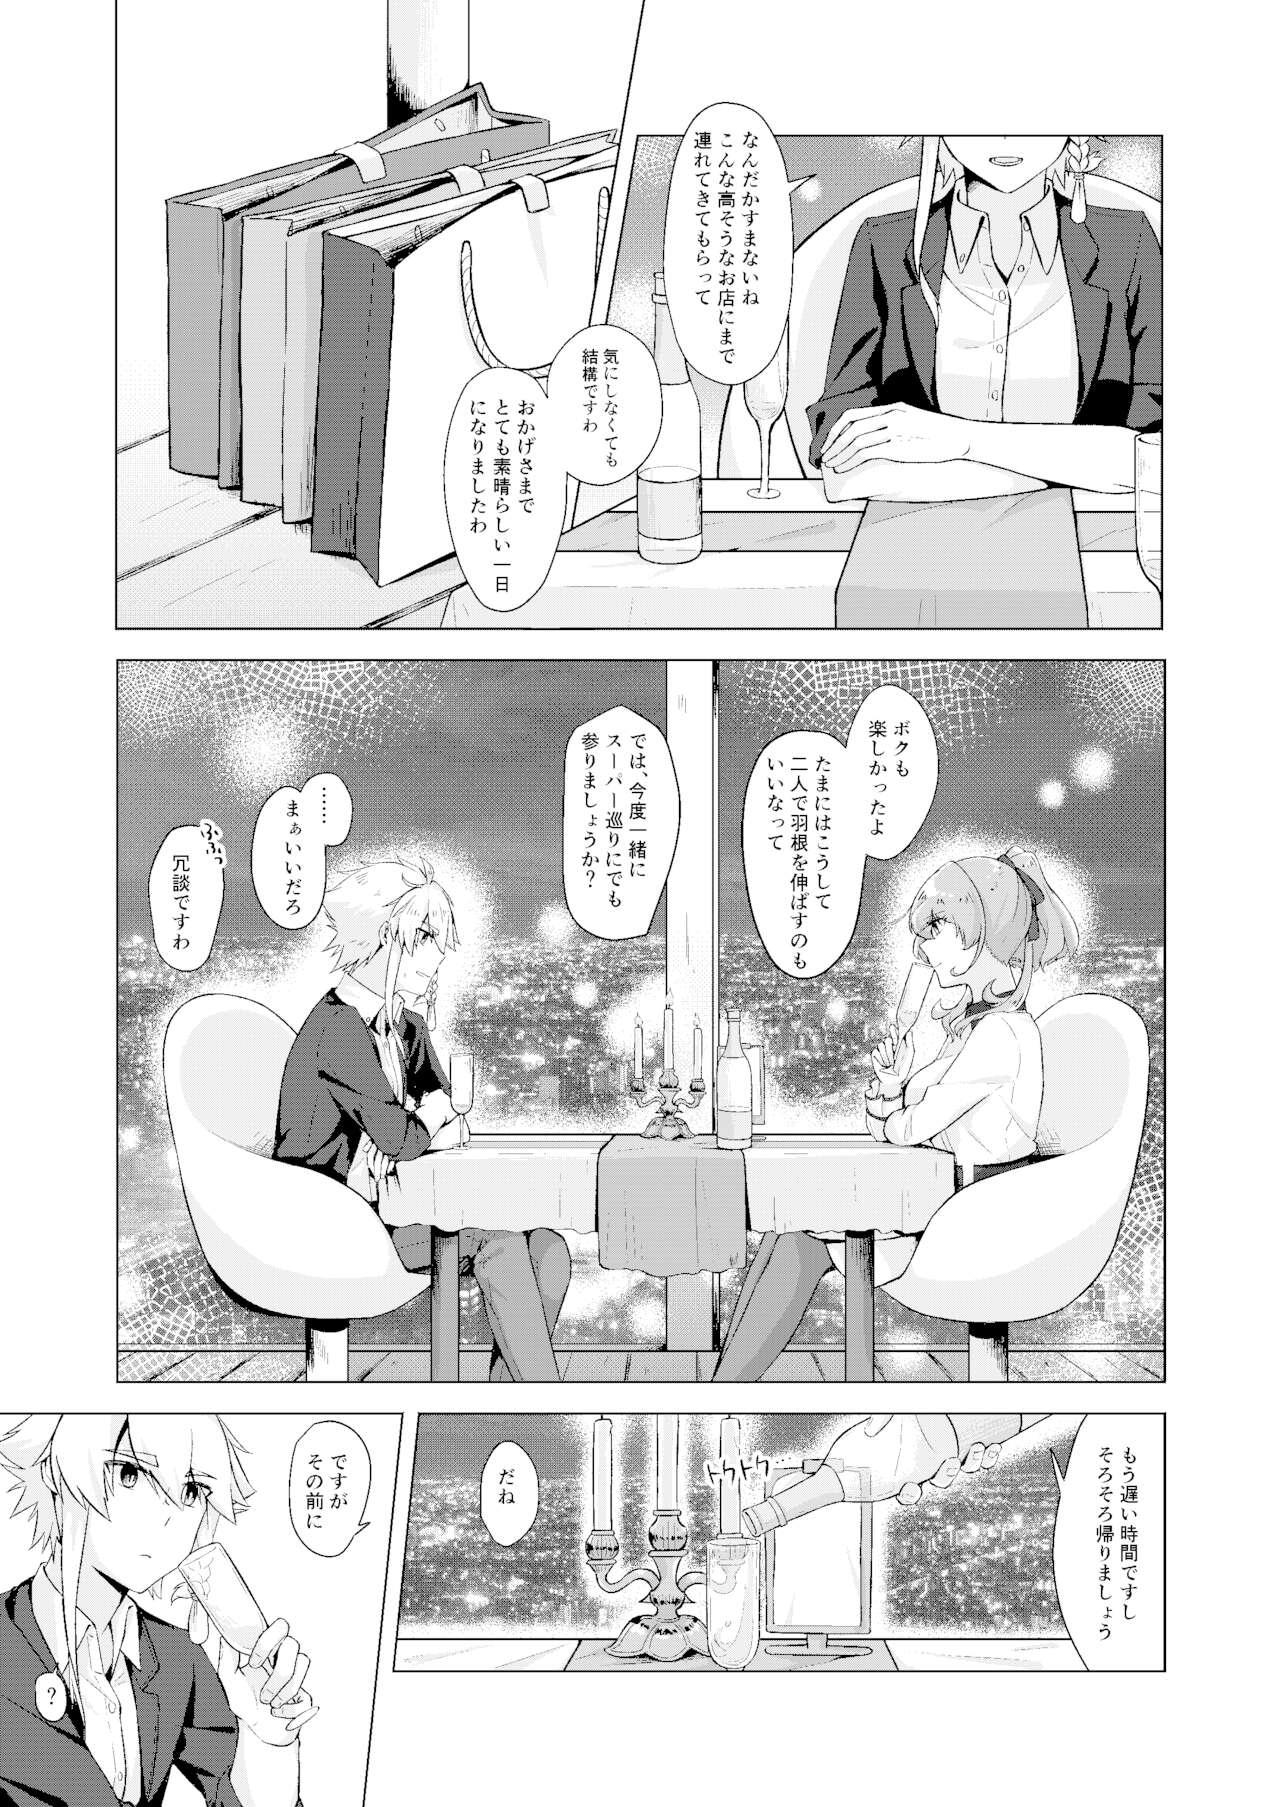 Spooning THE ELITE GUARDS' DAY OFF - Toji no miko Blond - Page 2